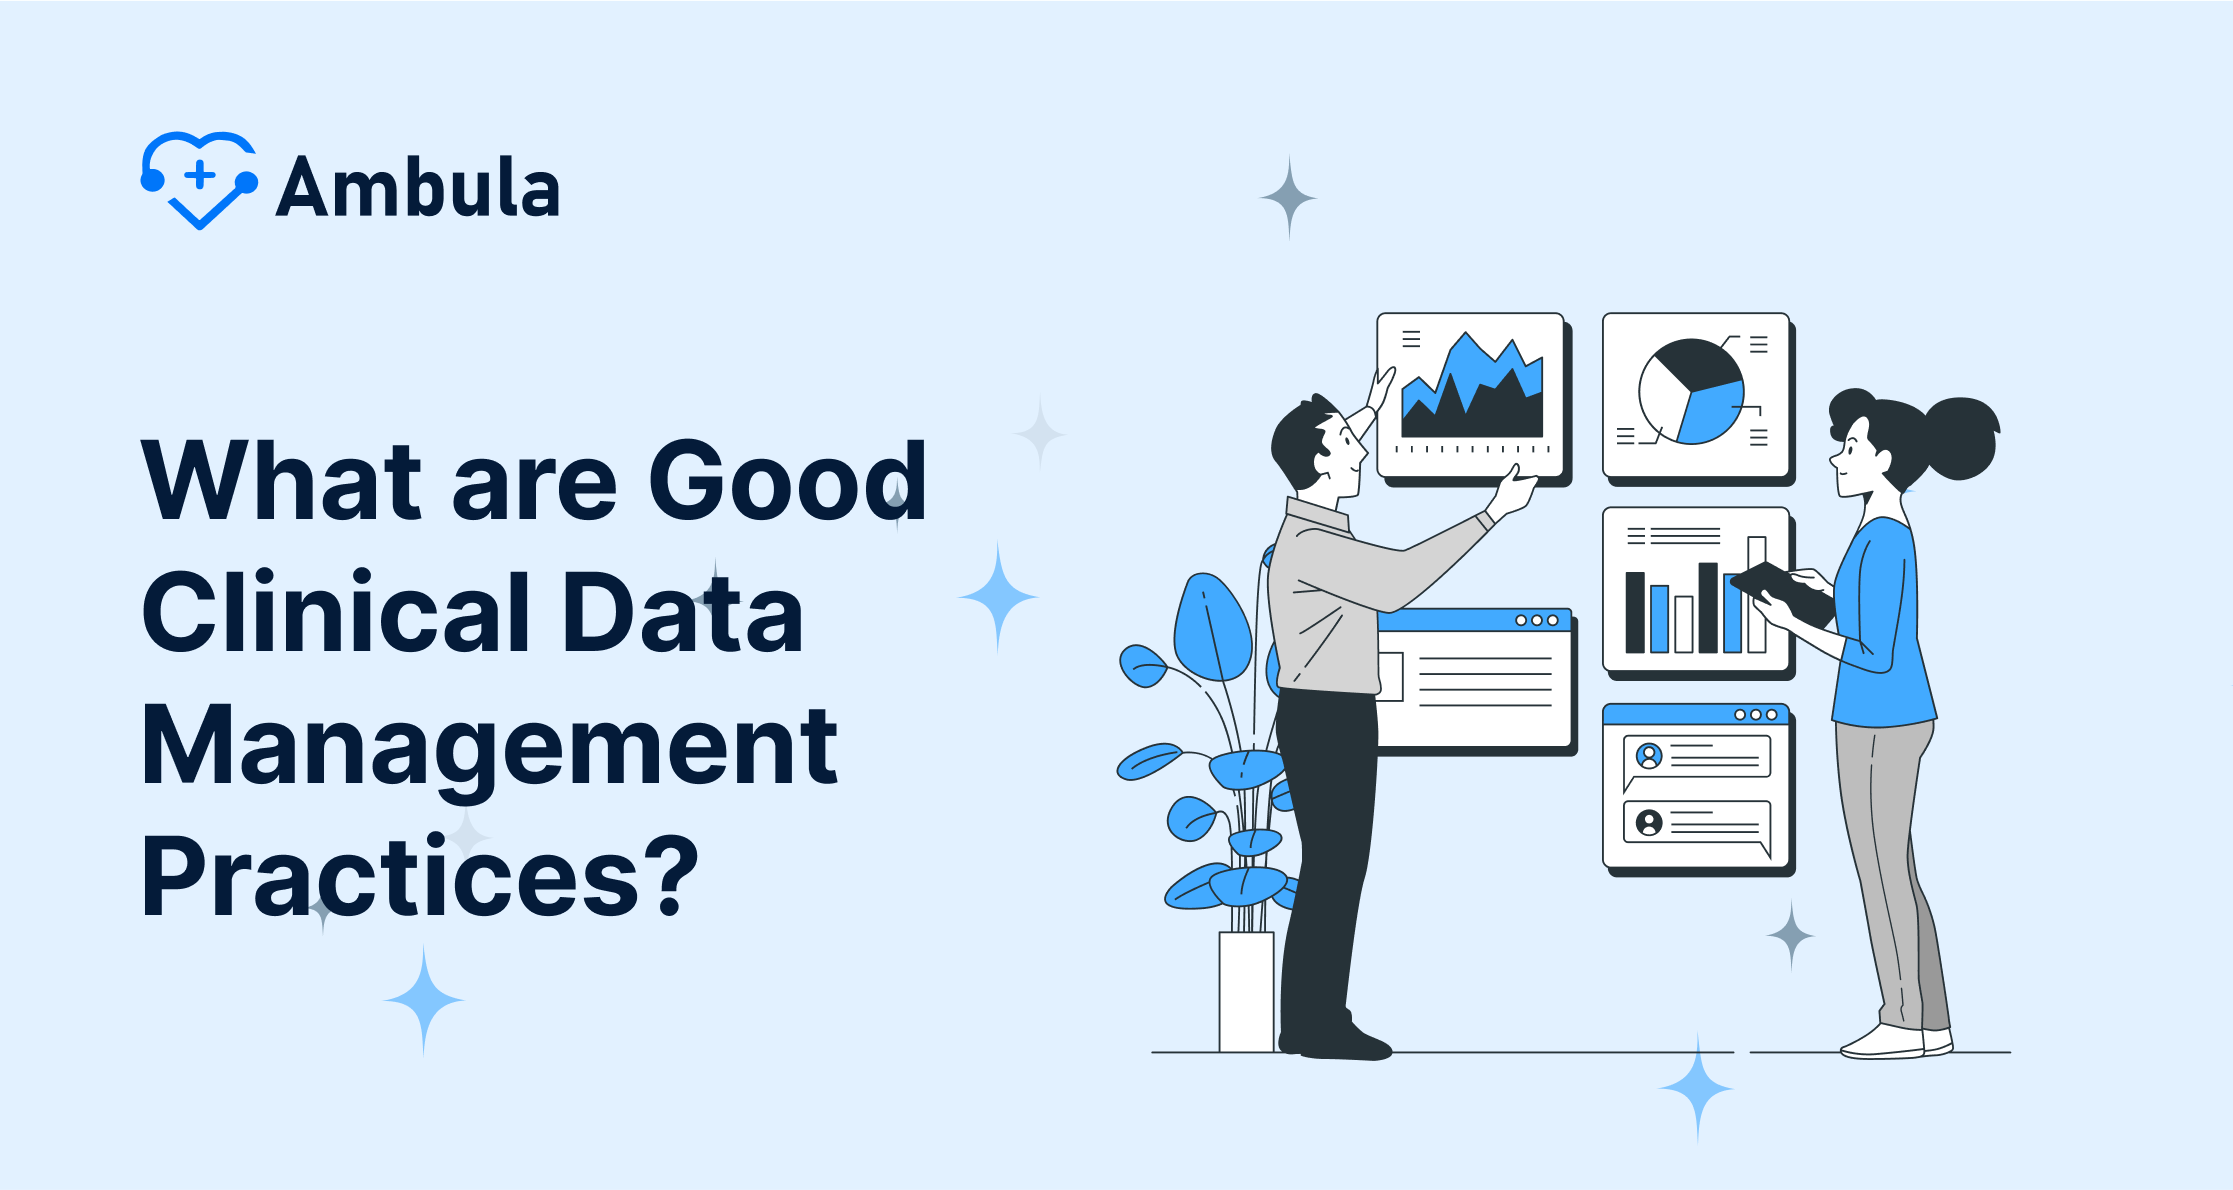 What are Good Clinical Data Management Practices?